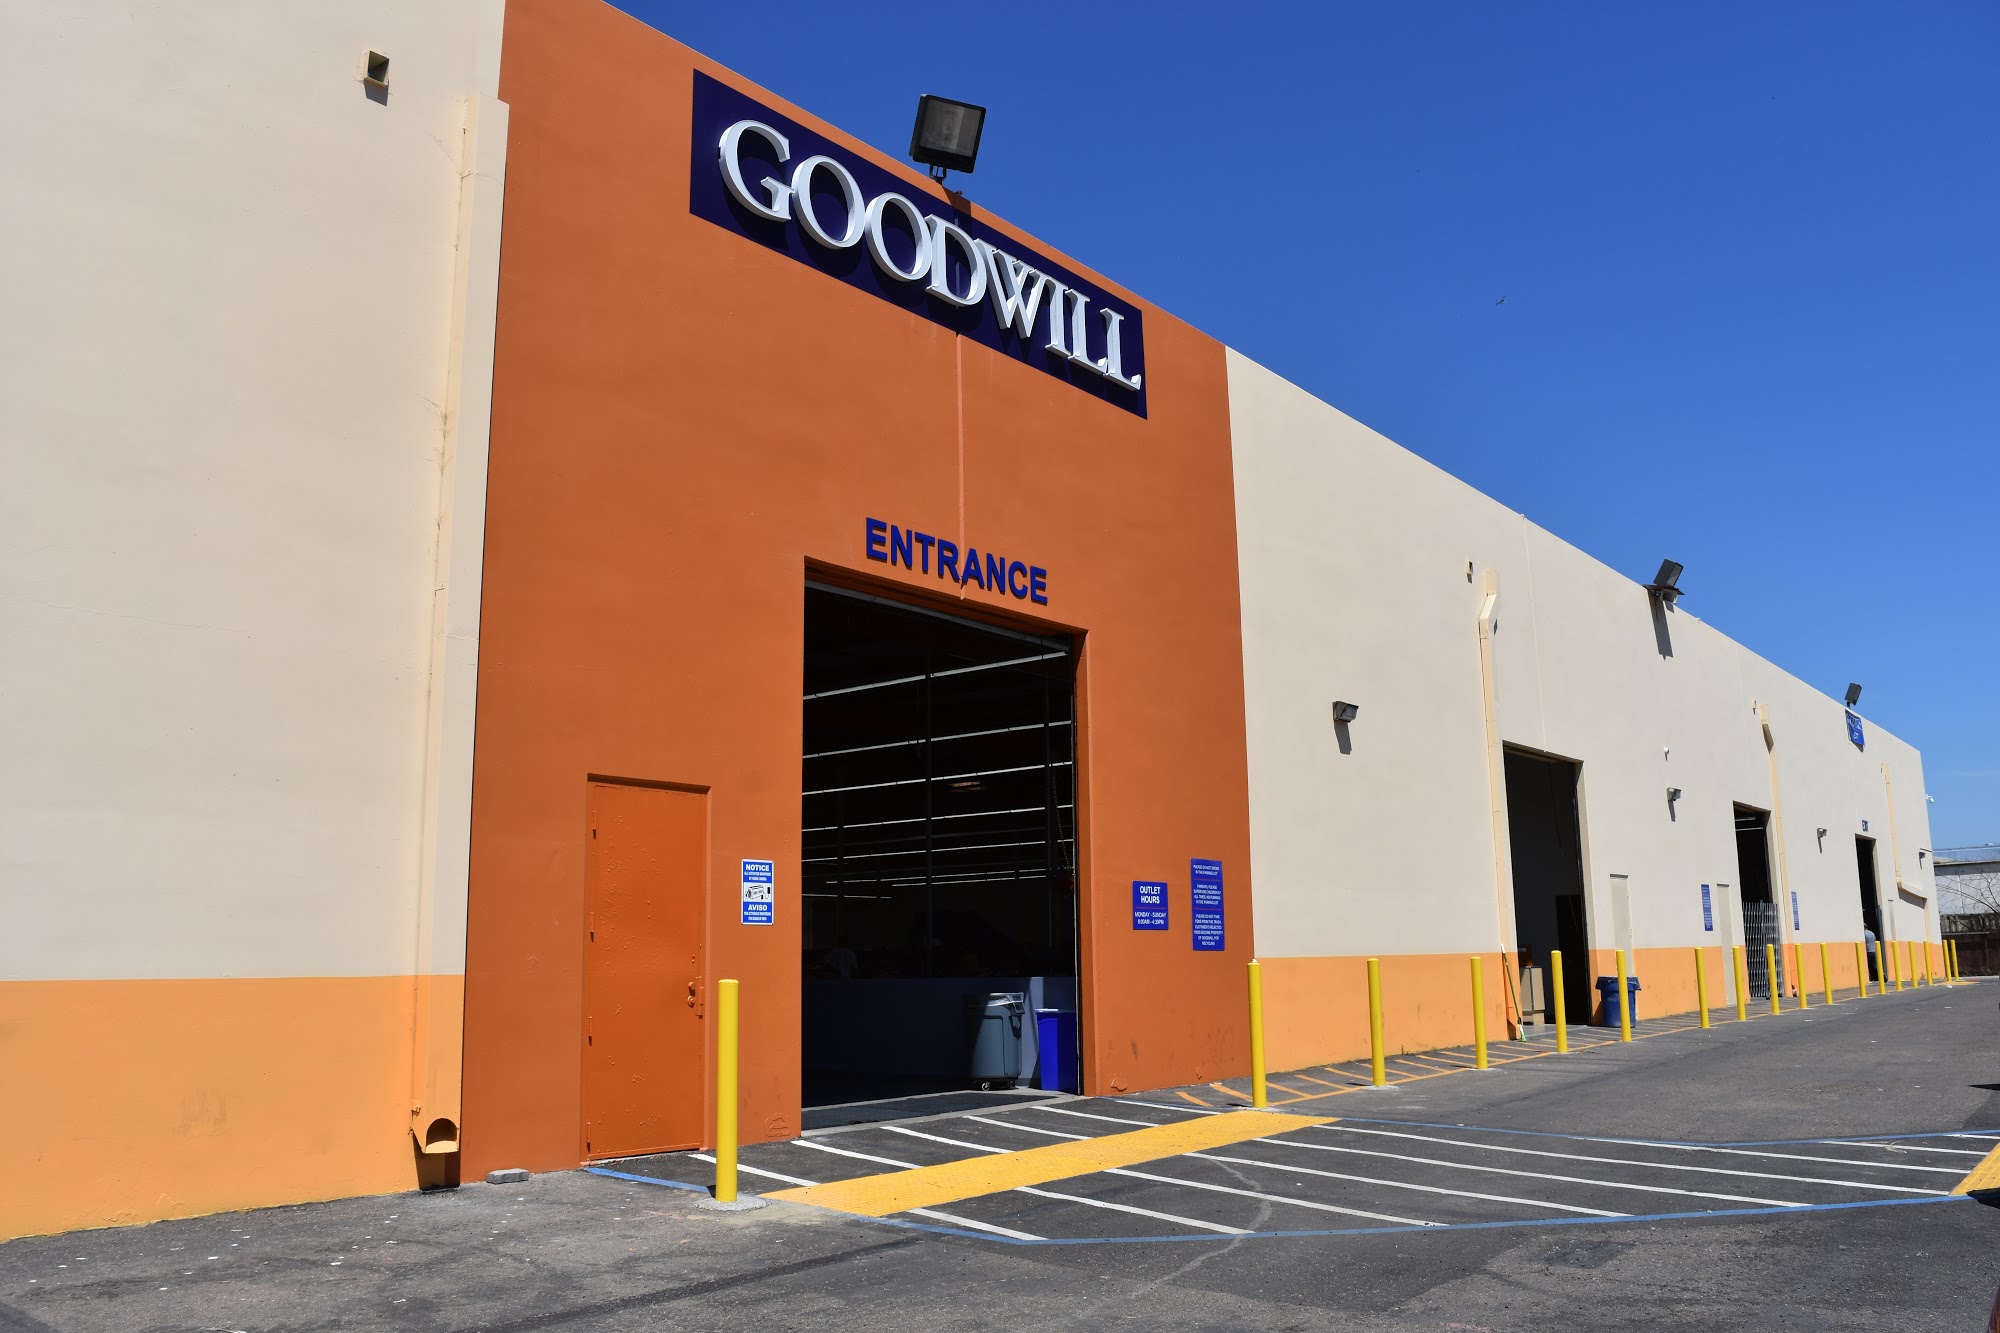 Goodwill Outlet Center and Donation Center